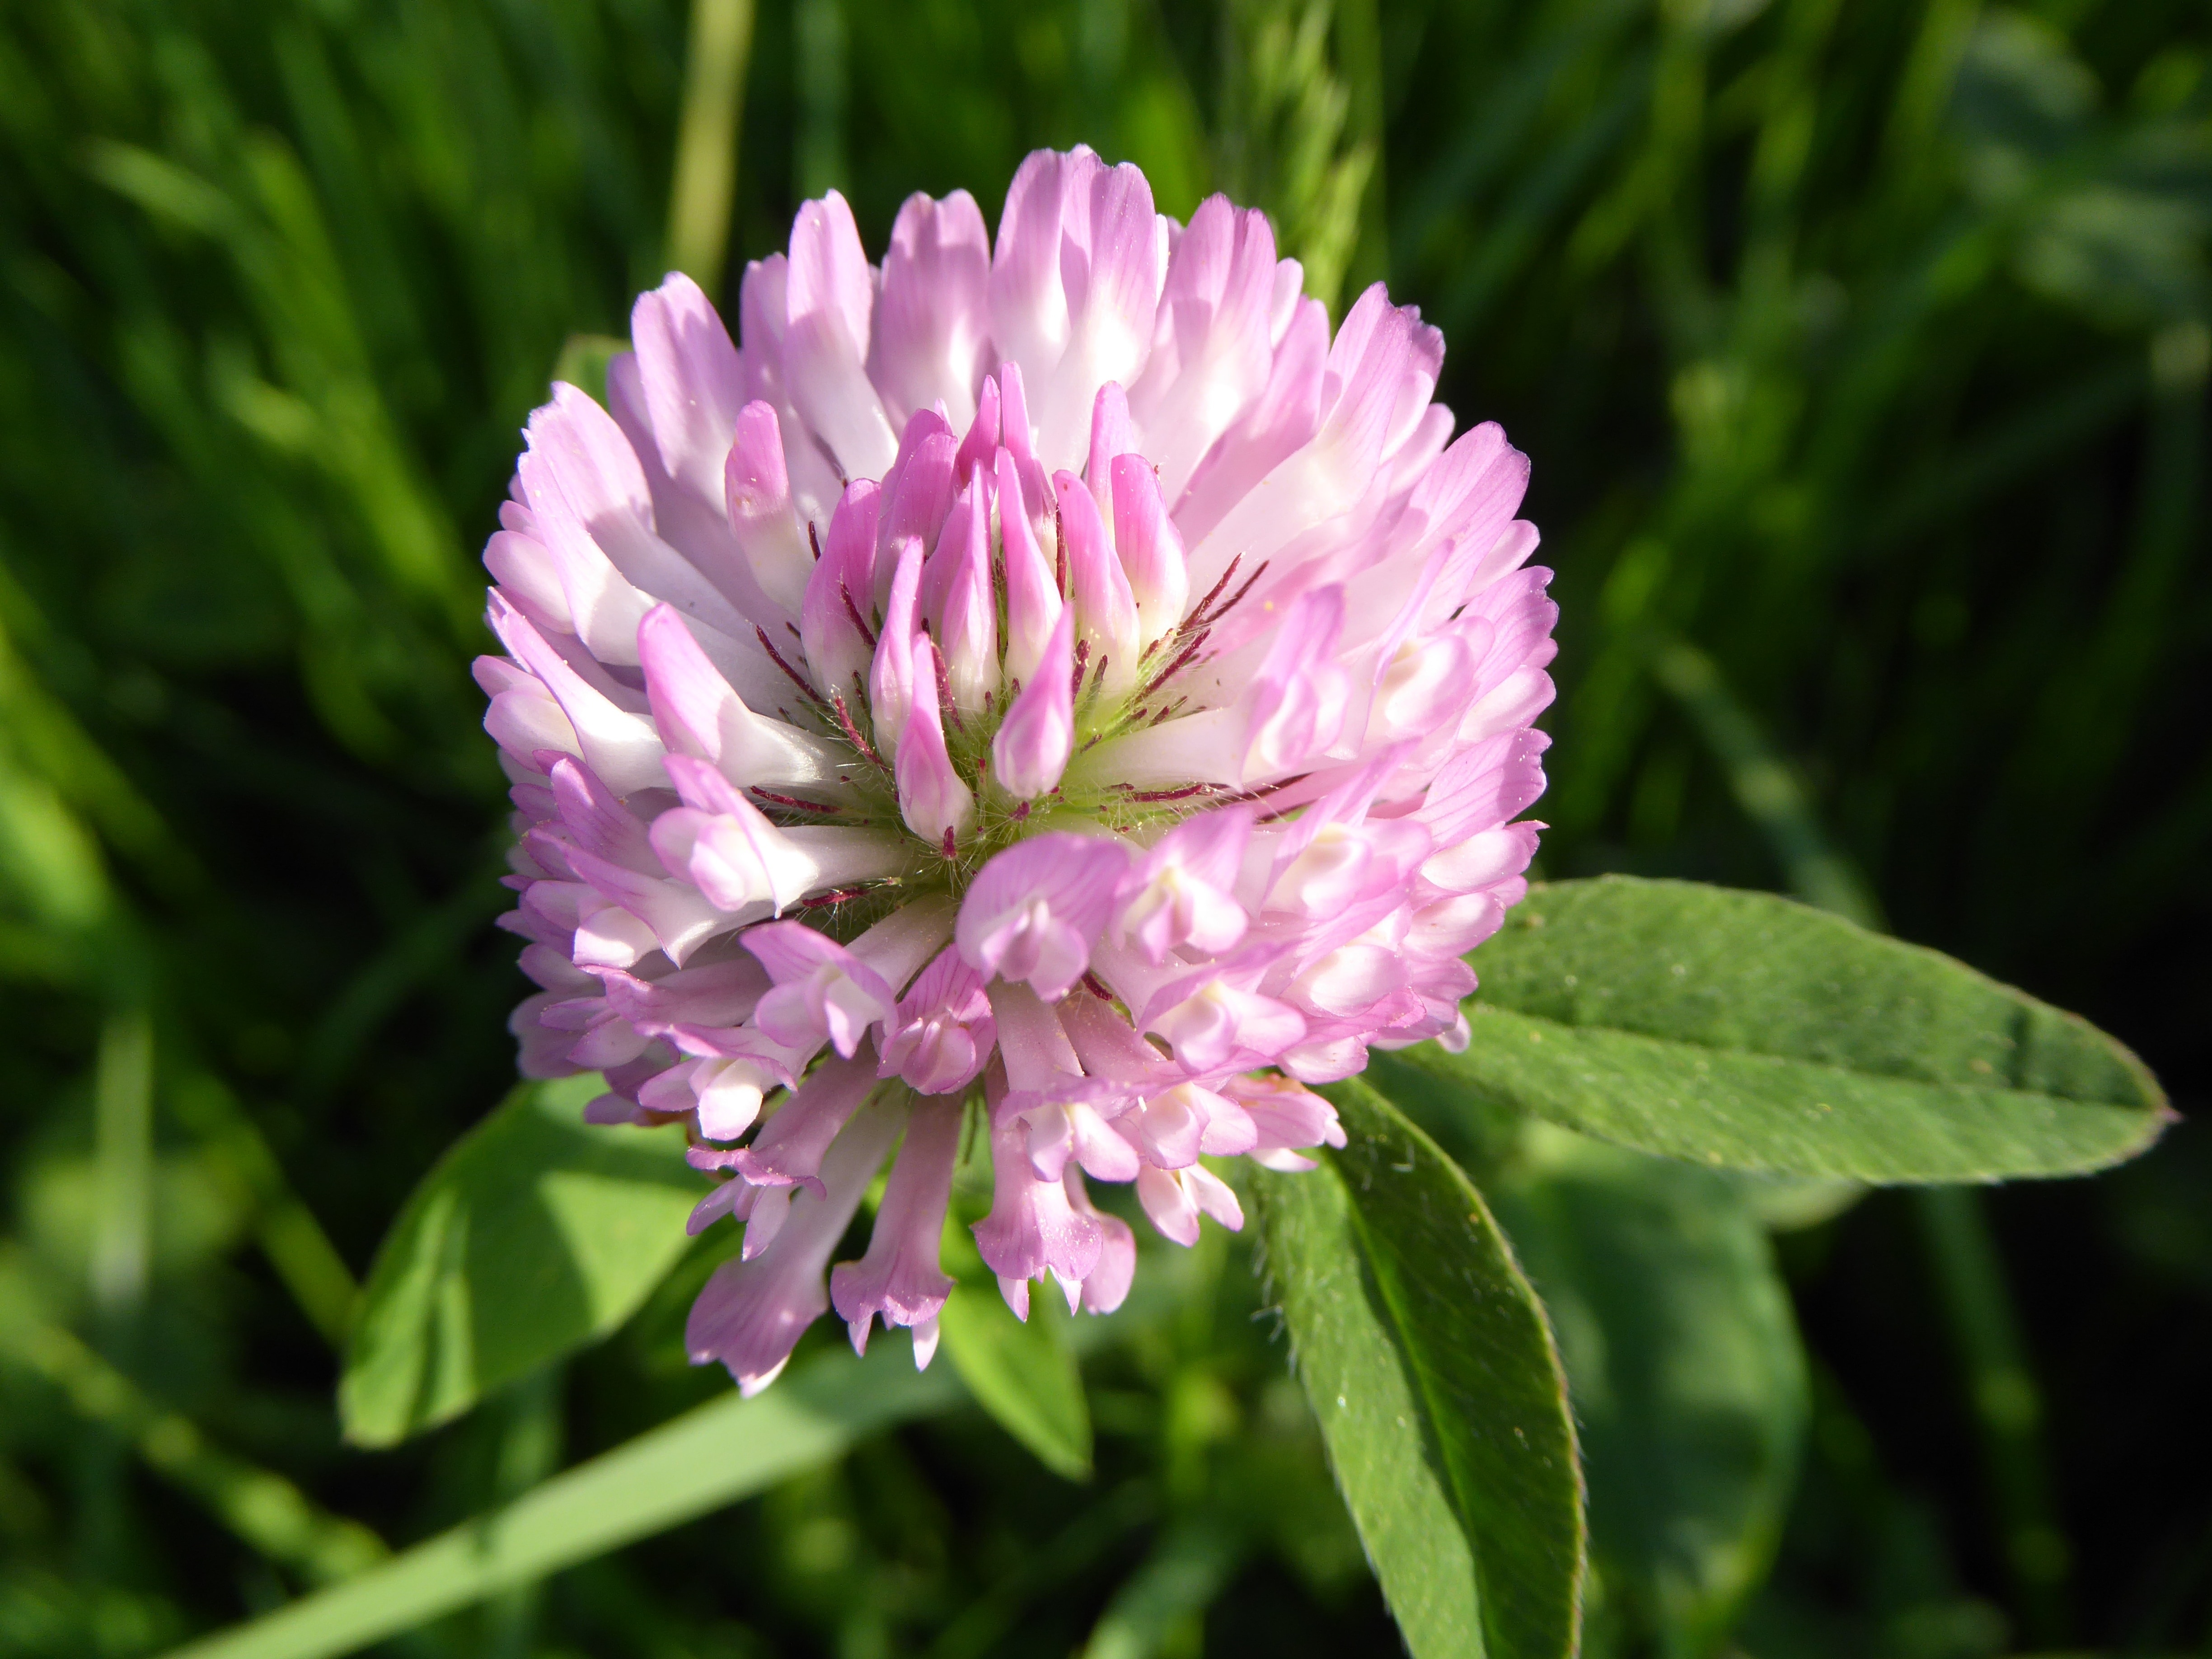 About, Soar, Pink, Red Clover, flower, nature